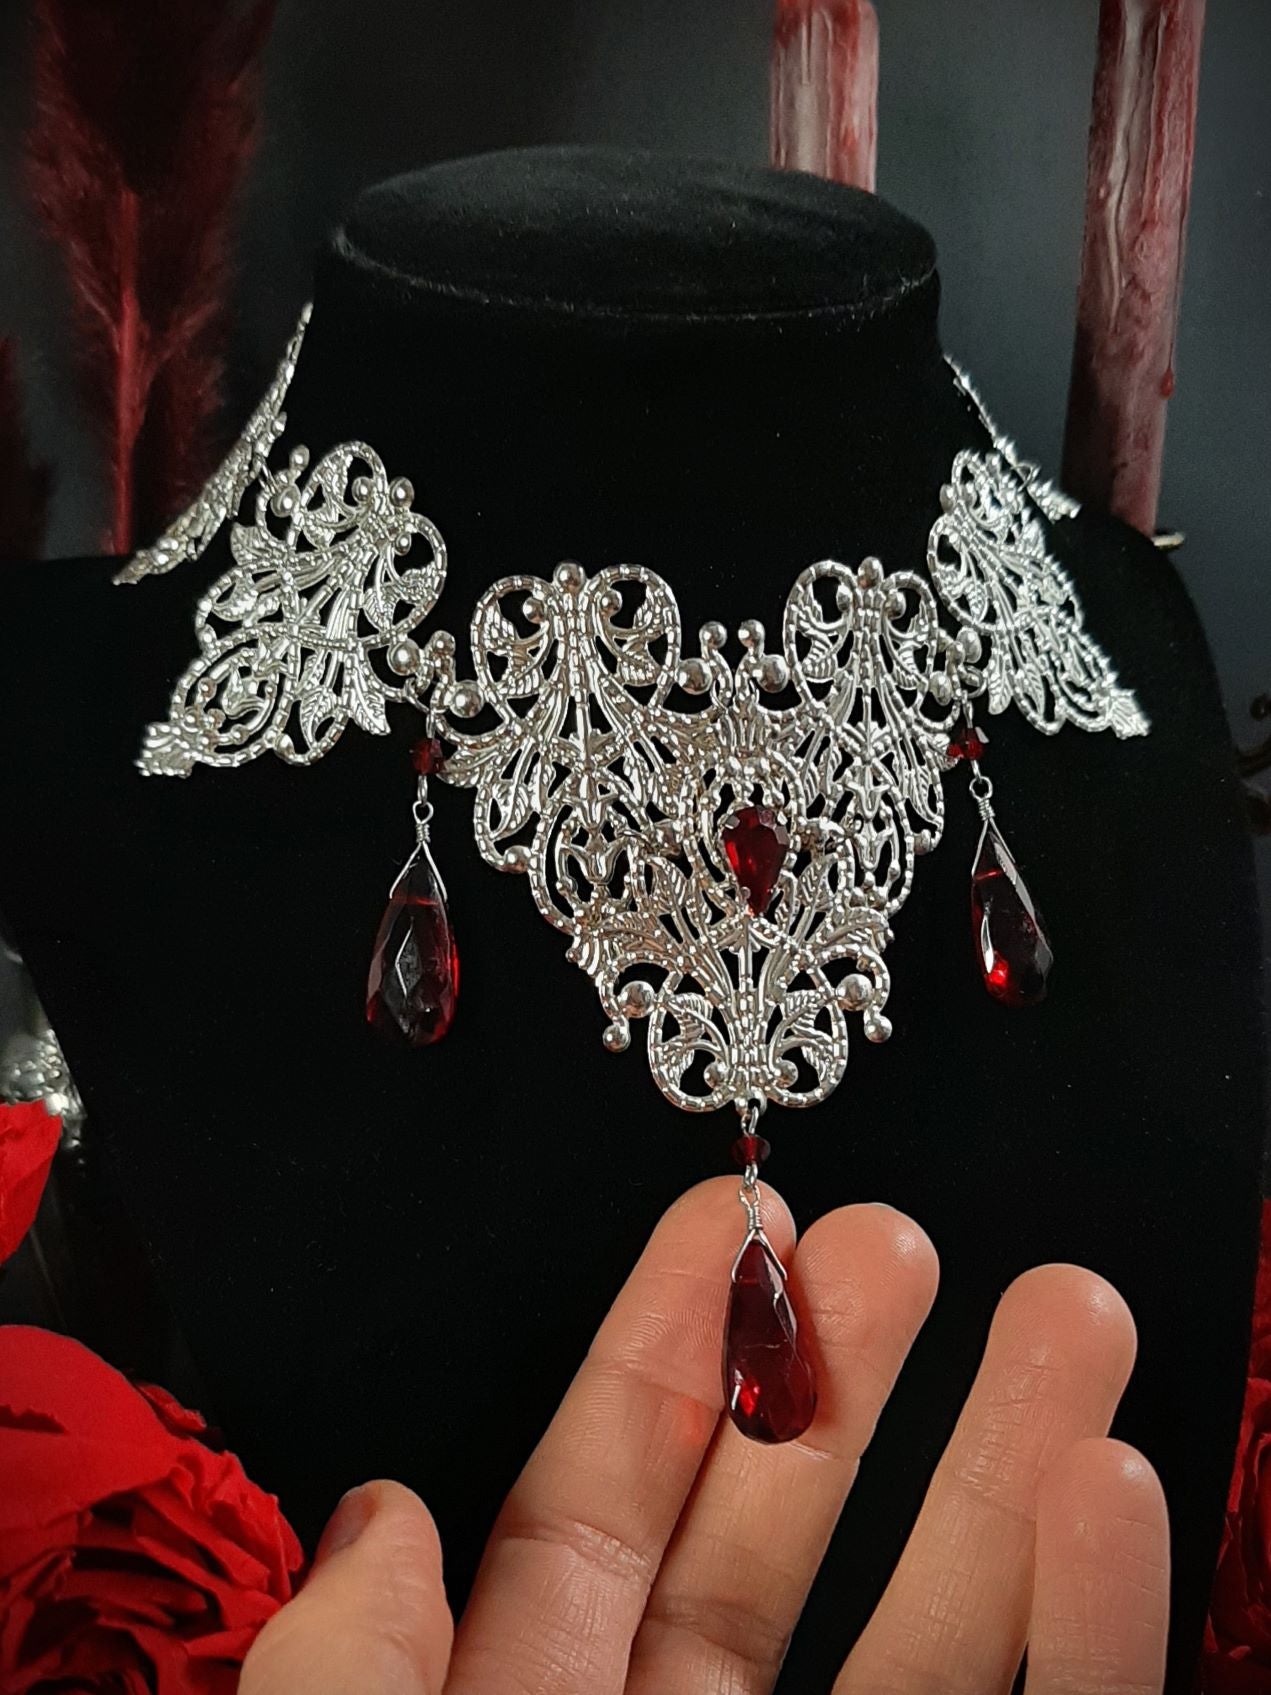 𝕺𝖕𝖚𝖑𝖊𝖓𝖈𝖊 𝟑 - Epic choker red- One left!